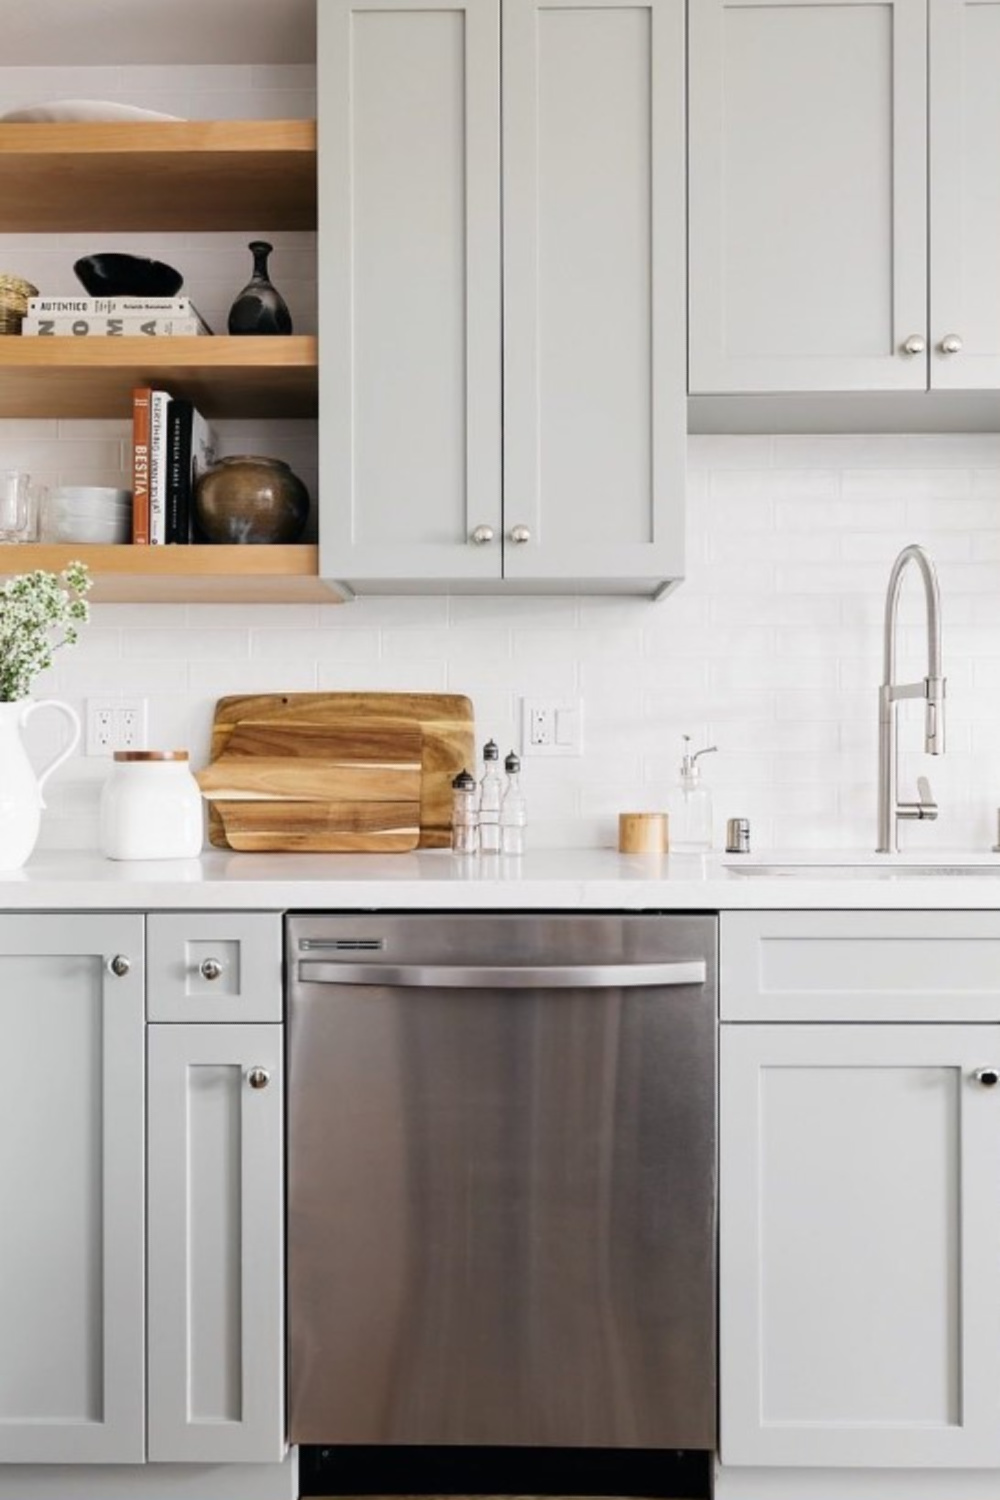 Benjamin Moore Fieldstone muted sage green paint color on kitchen cabinets - @caralinesierotainteriors. #benjaminmoorefieldstone #greenkitchencabinets